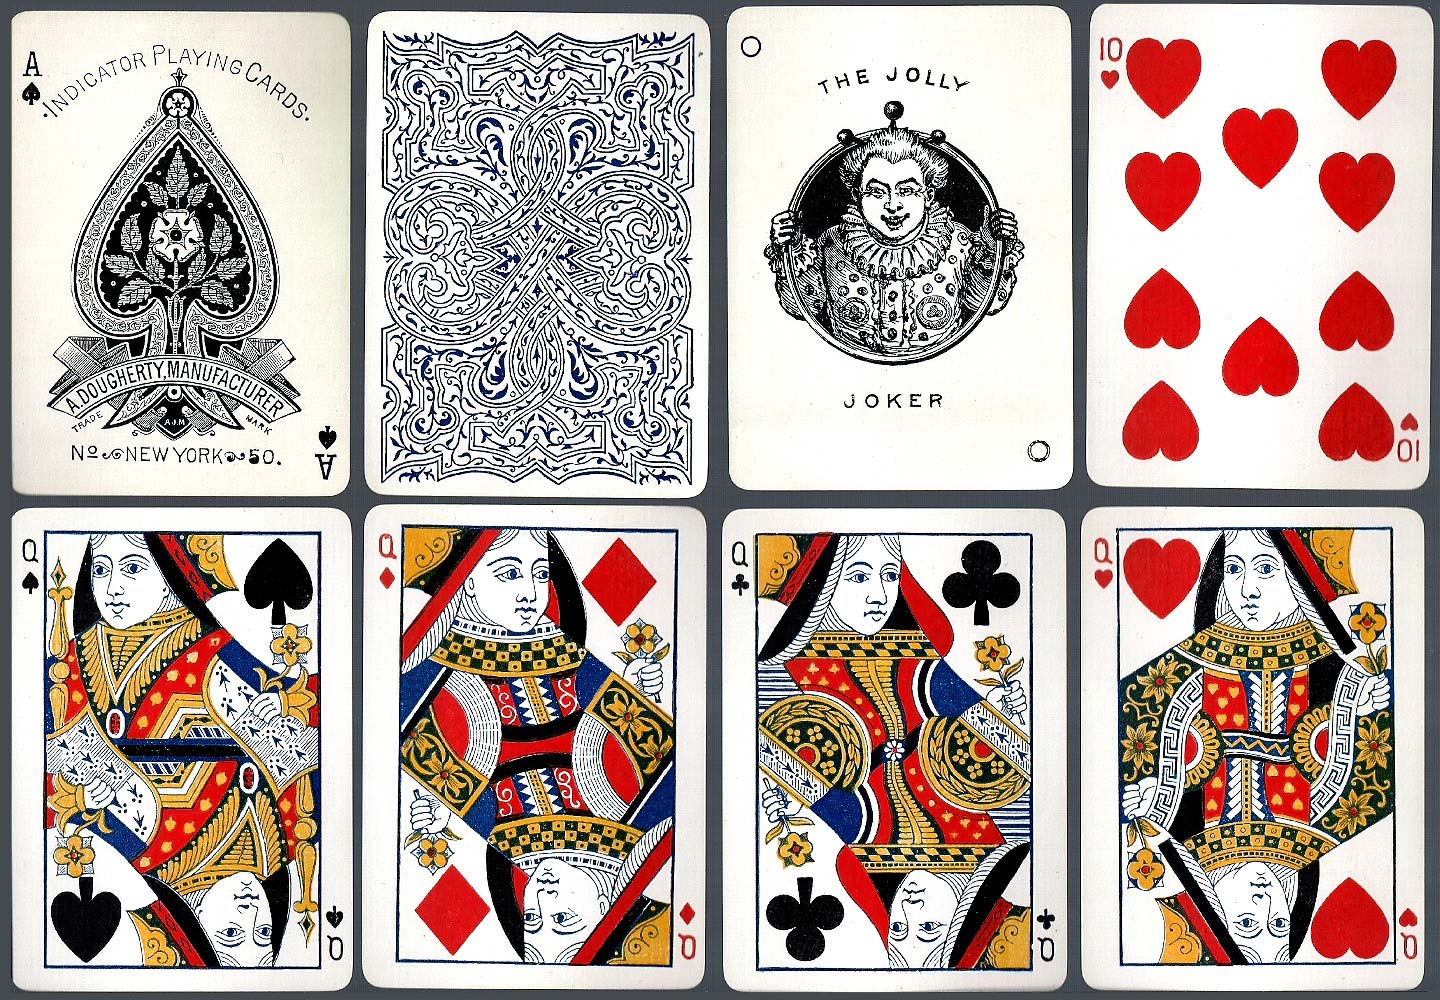 Indicator No.50 - The World of Playing Cards